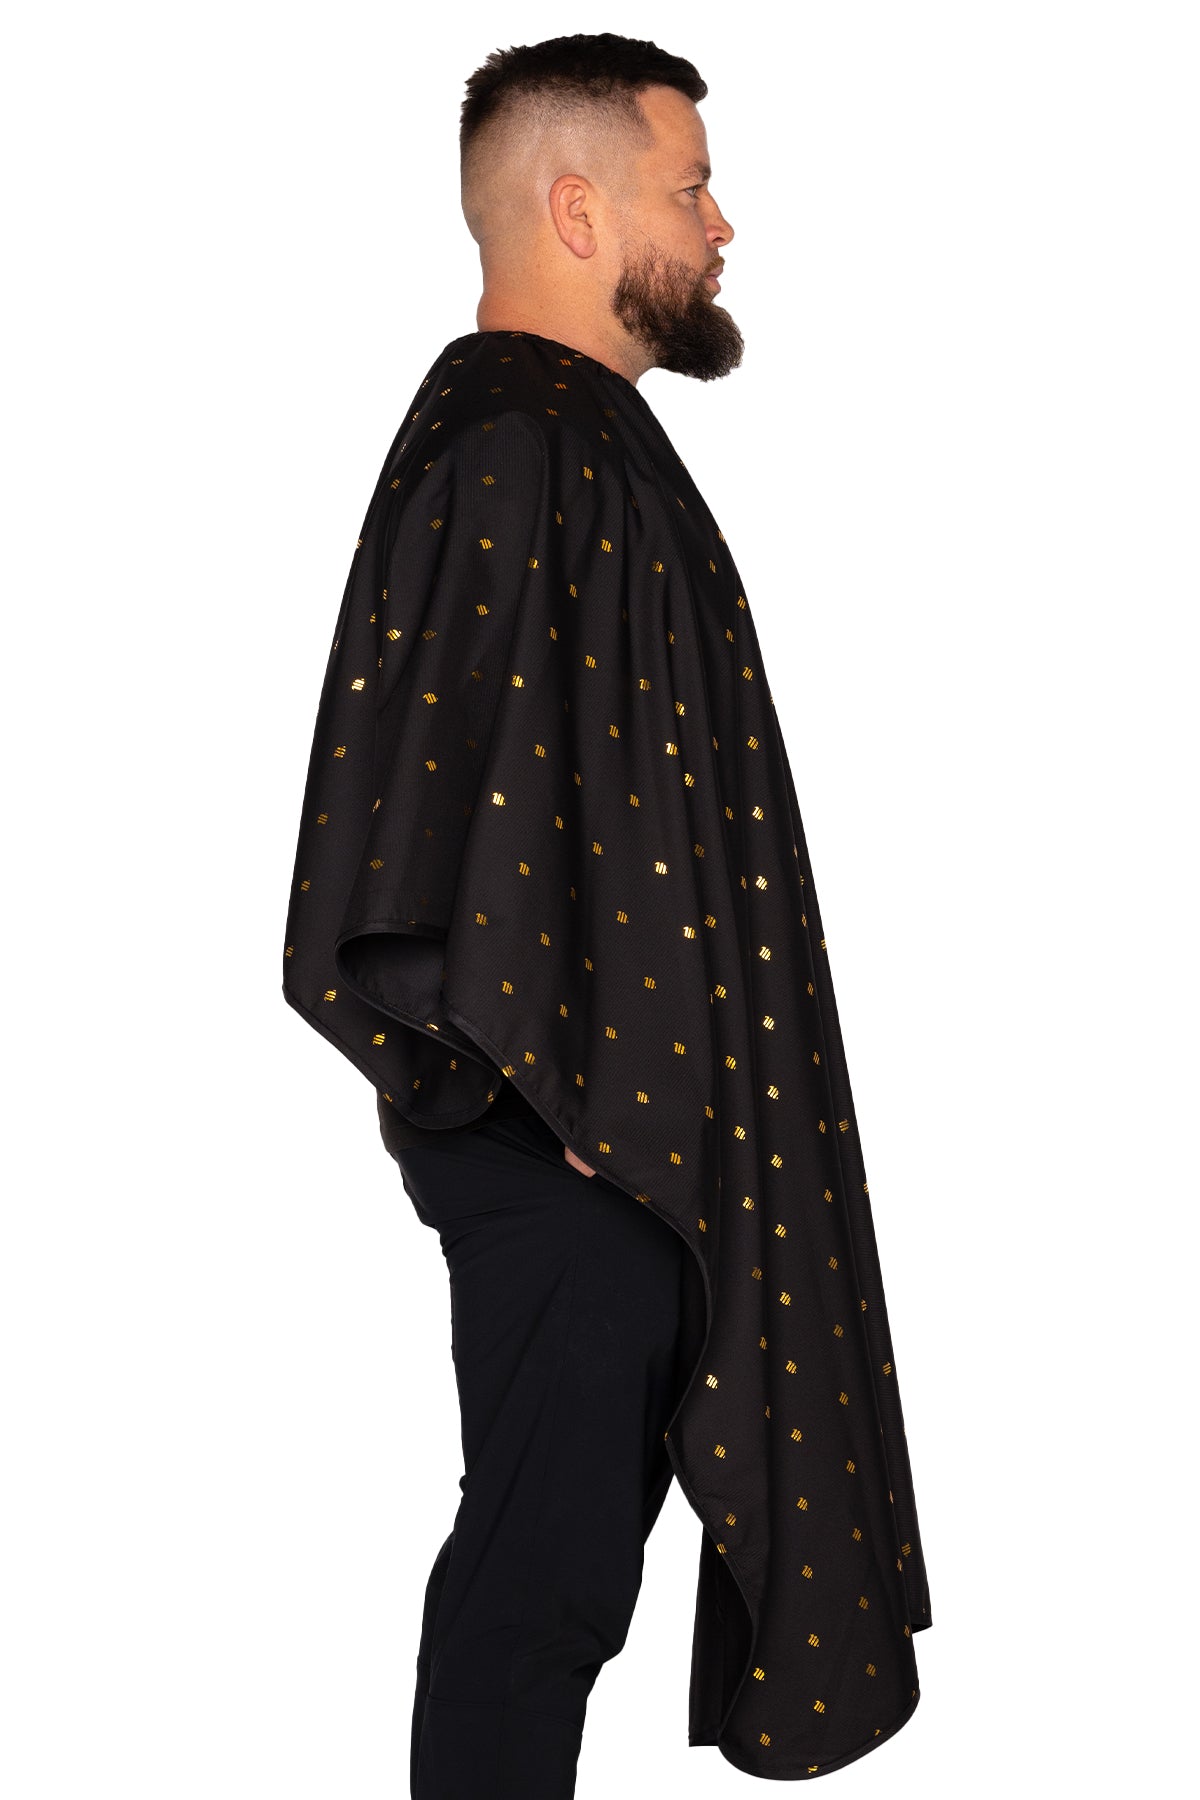 The Barber Cape - 24K Gold Collection